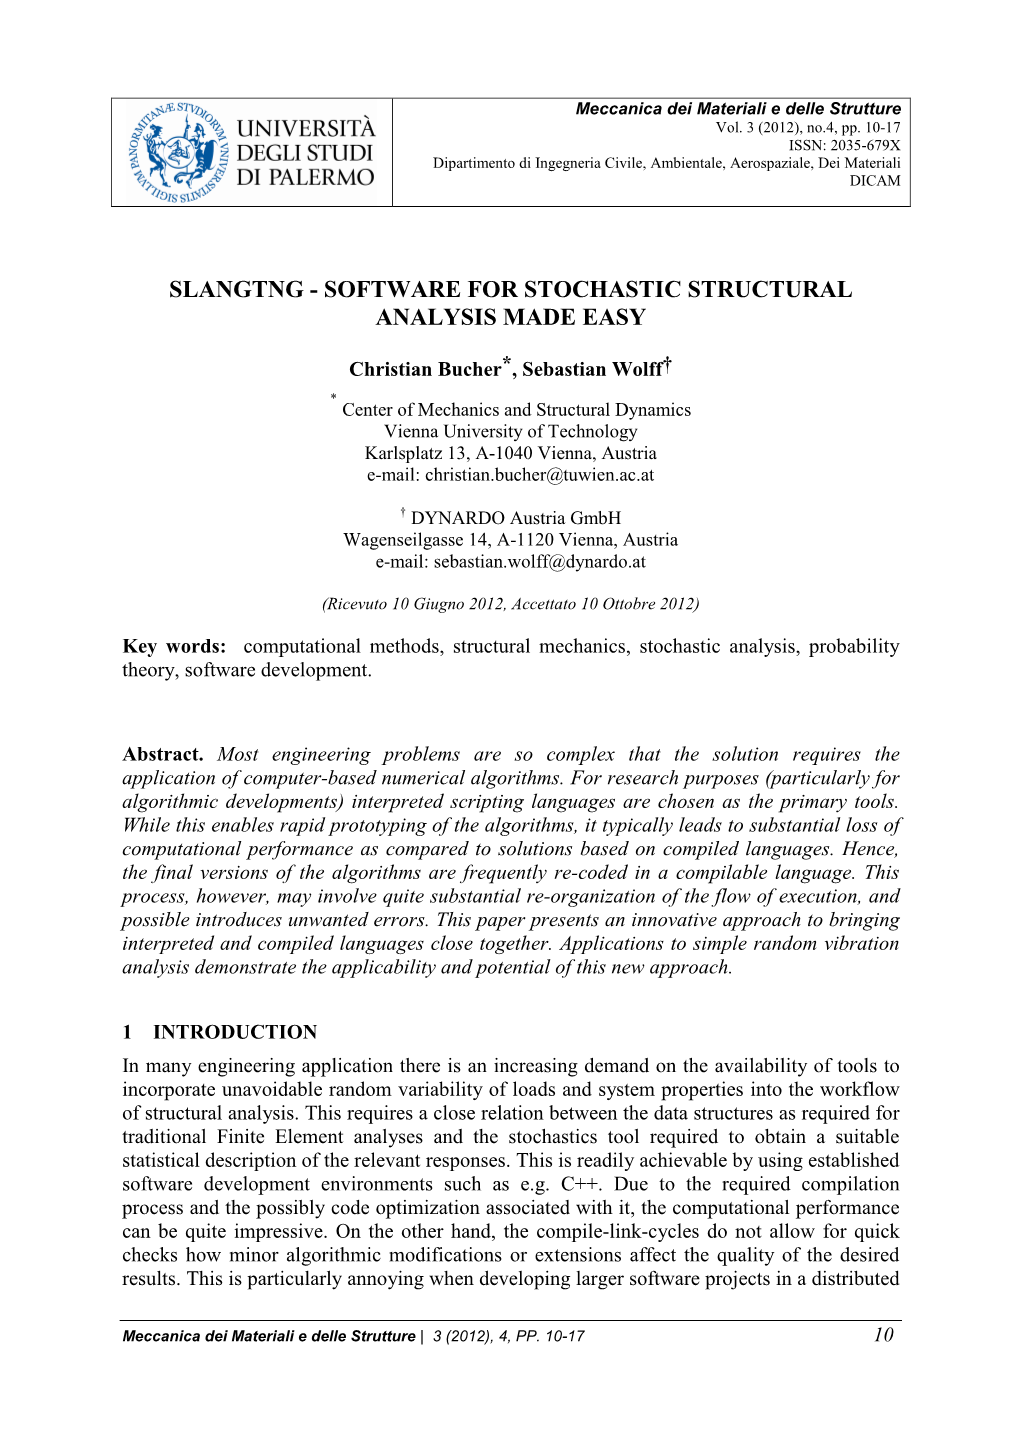 Slangtng - Software for Stochastic Structural Analysis Made Easy